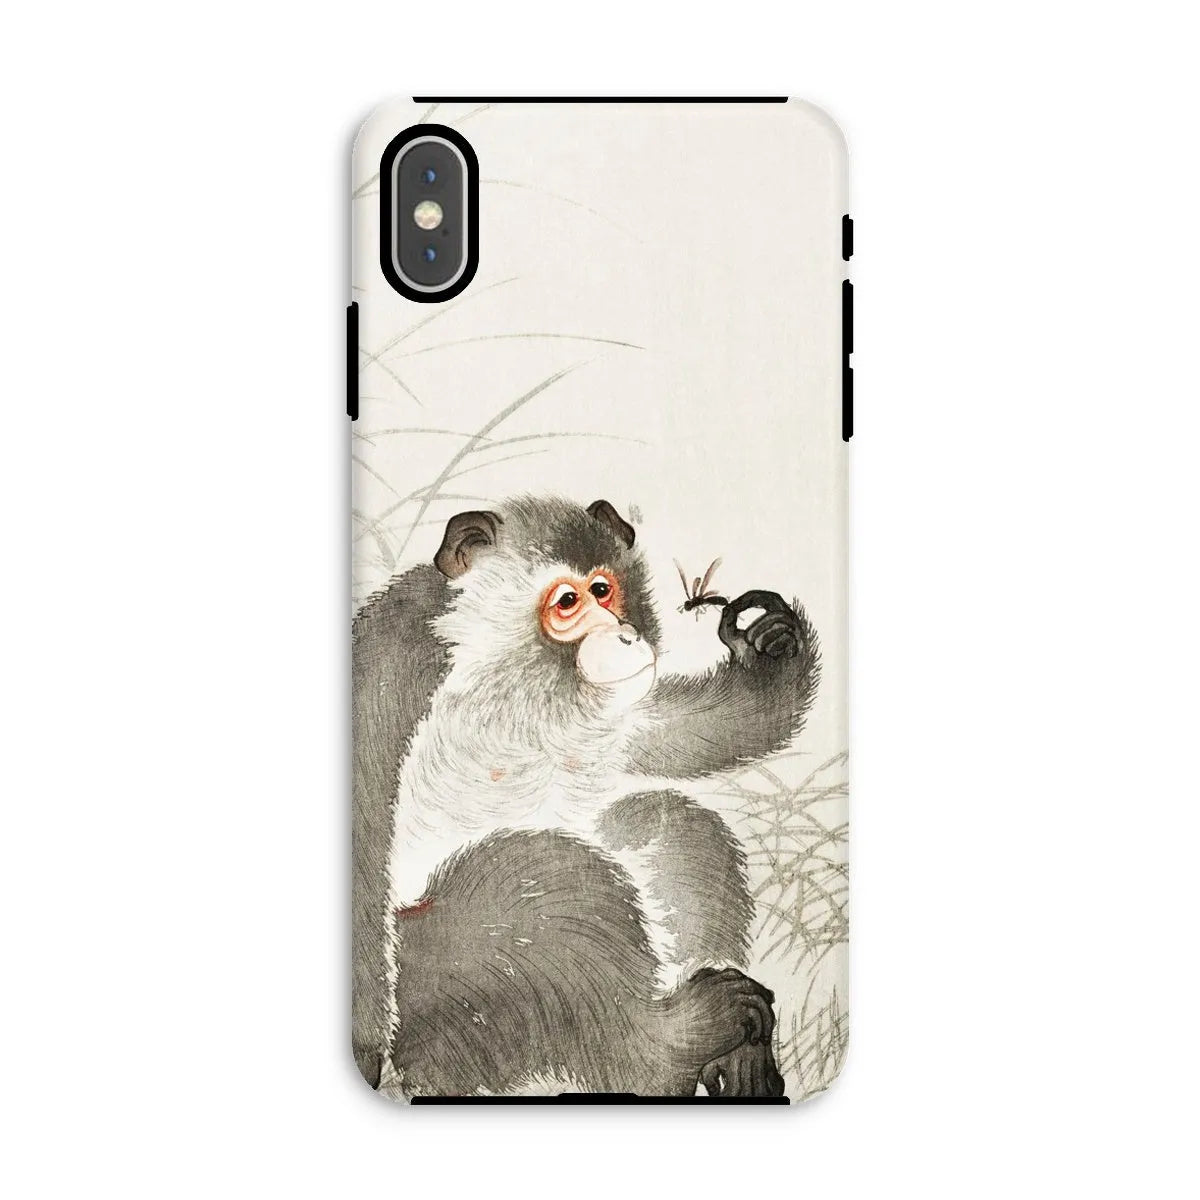 Monkey With Insect - Shin-hanga Art Phone Case - Ohara Koson - Iphone Xs Max / Matte - Mobile Phone Cases - Aesthetic